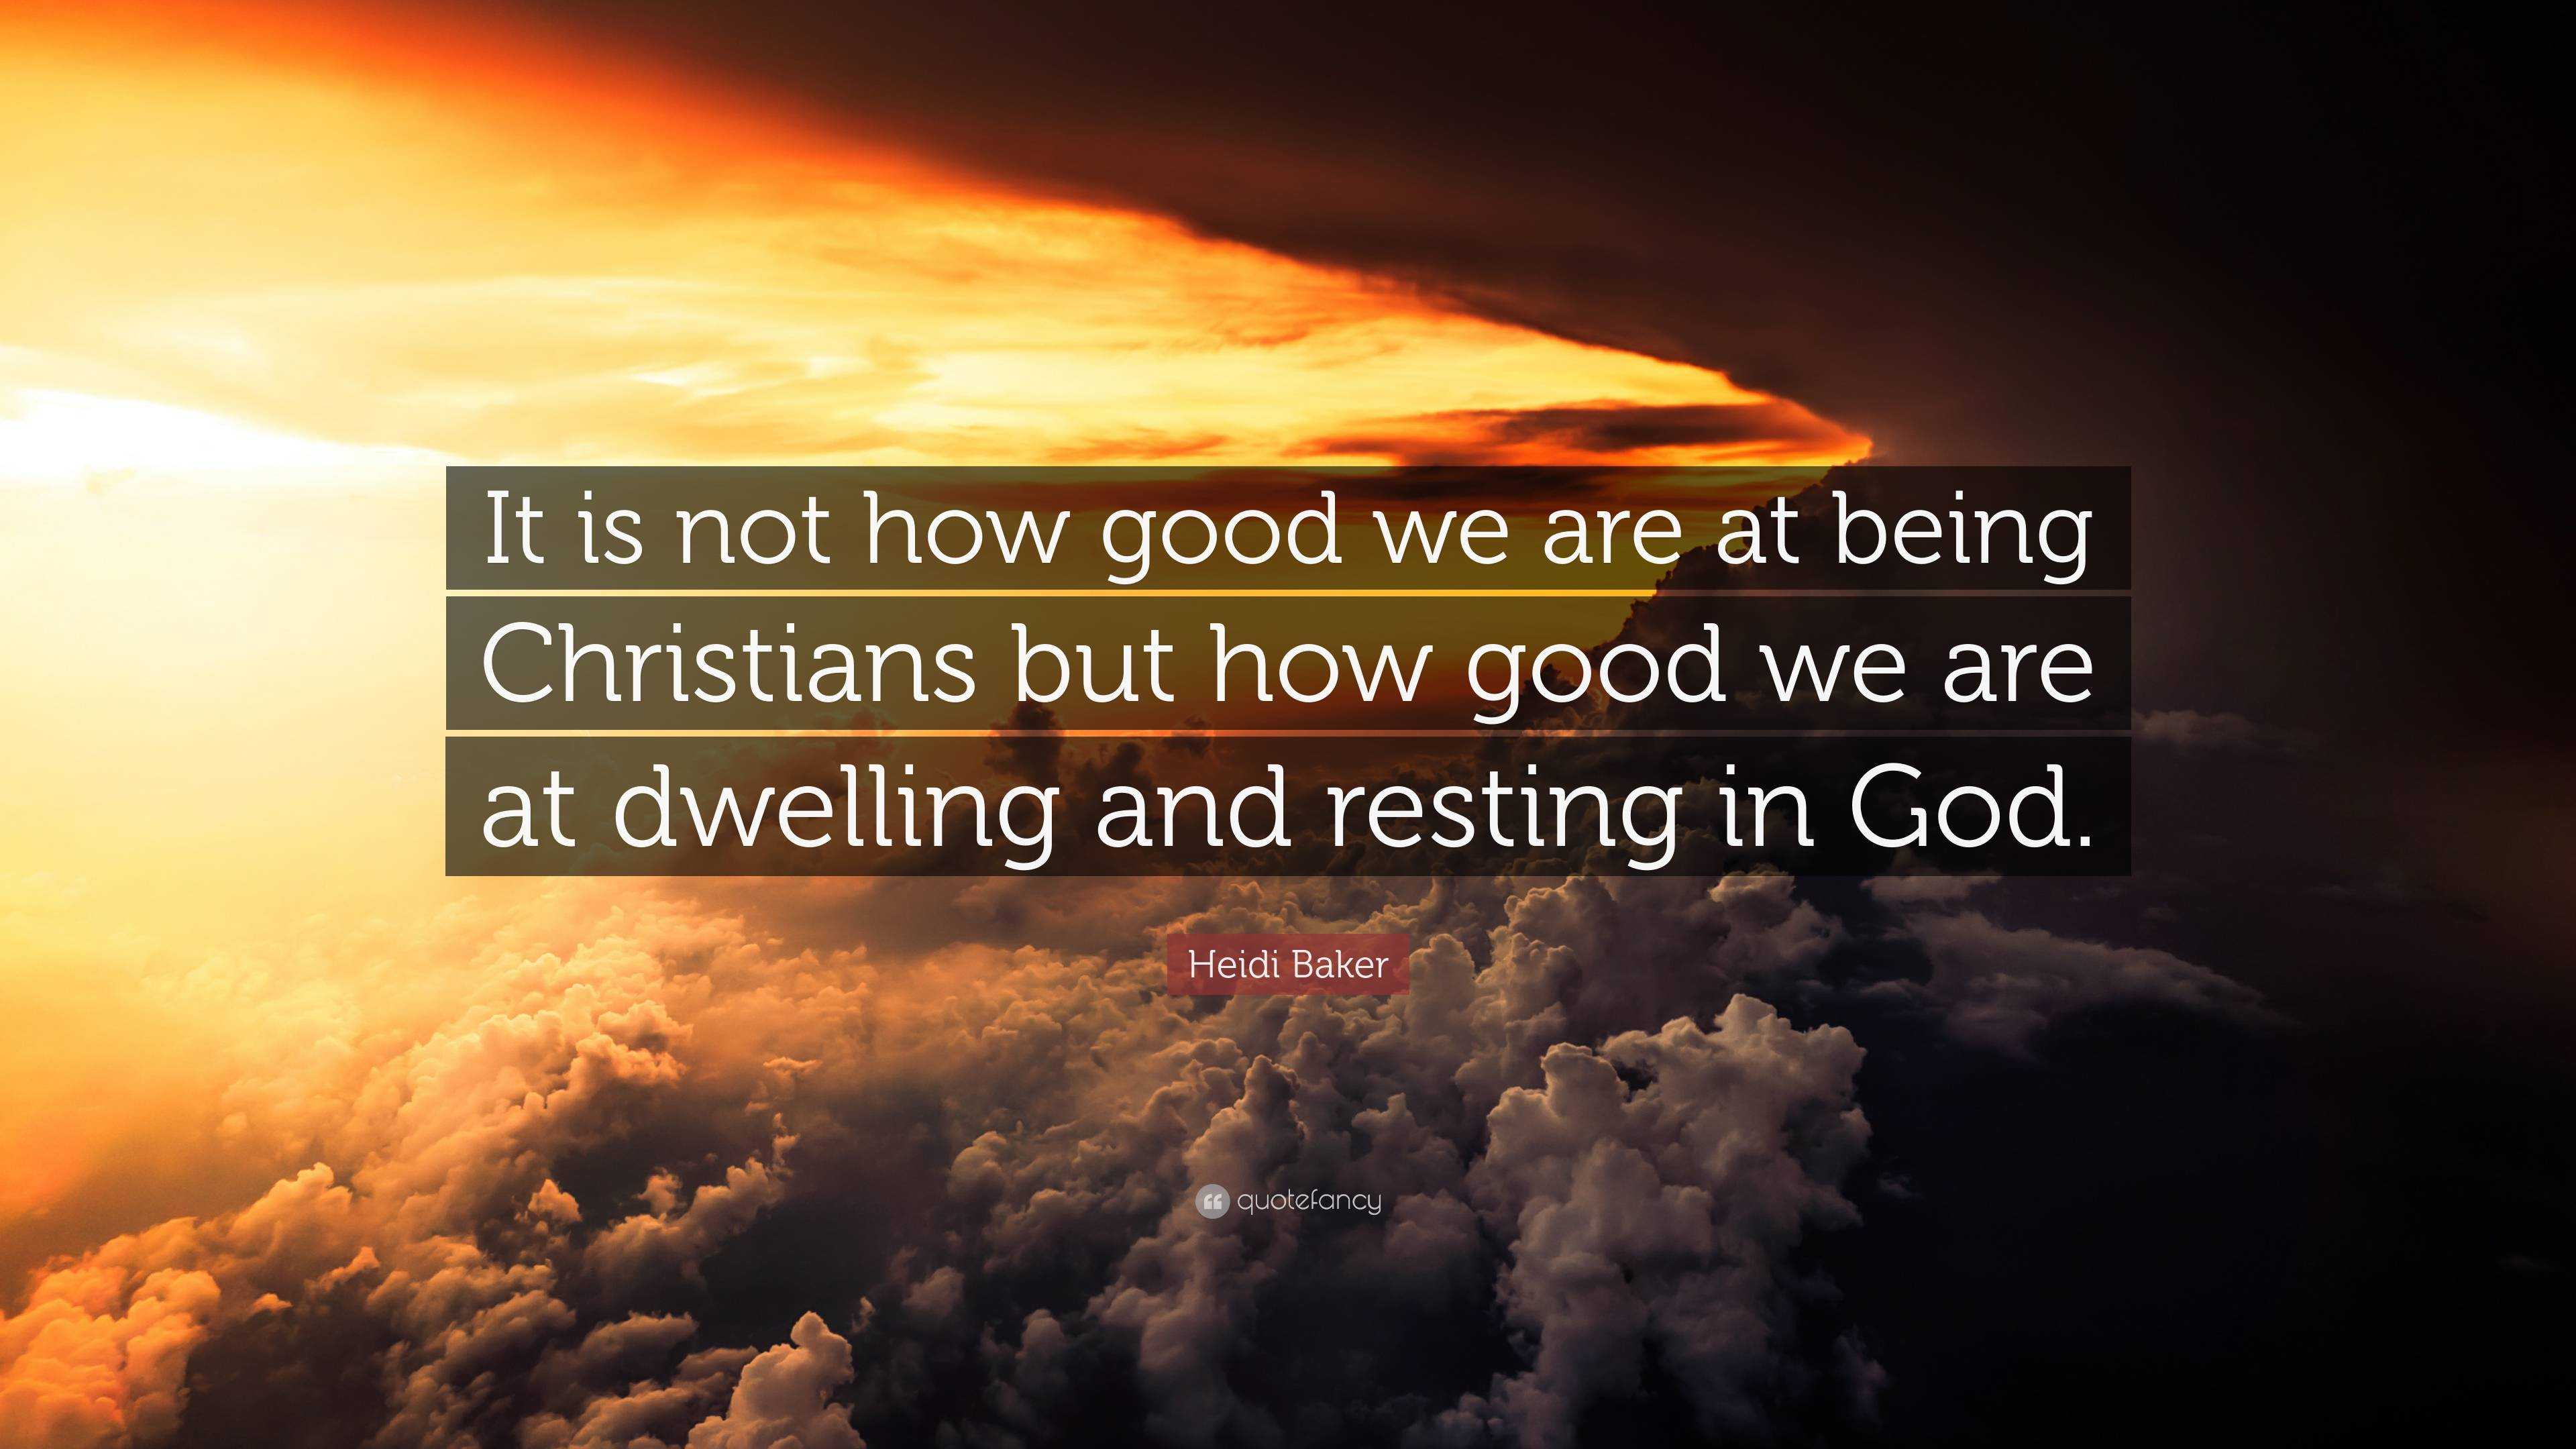 Heidi Baker Quote: “It is not how good we are at being Christians but ...